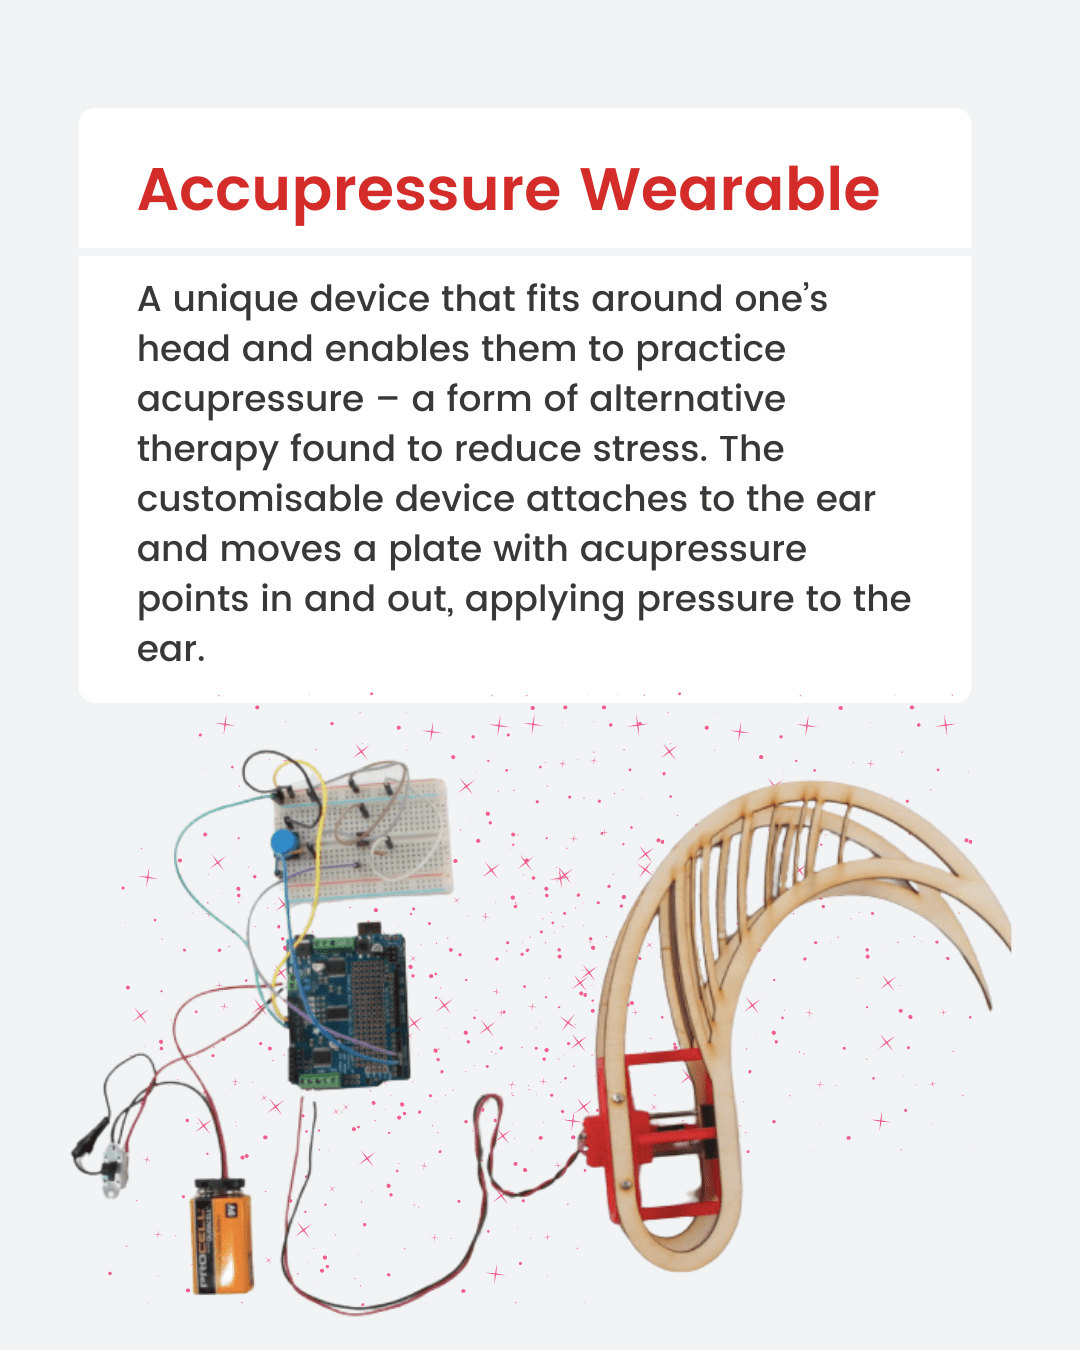 NuVu Project 2 - Accupressure Wearable